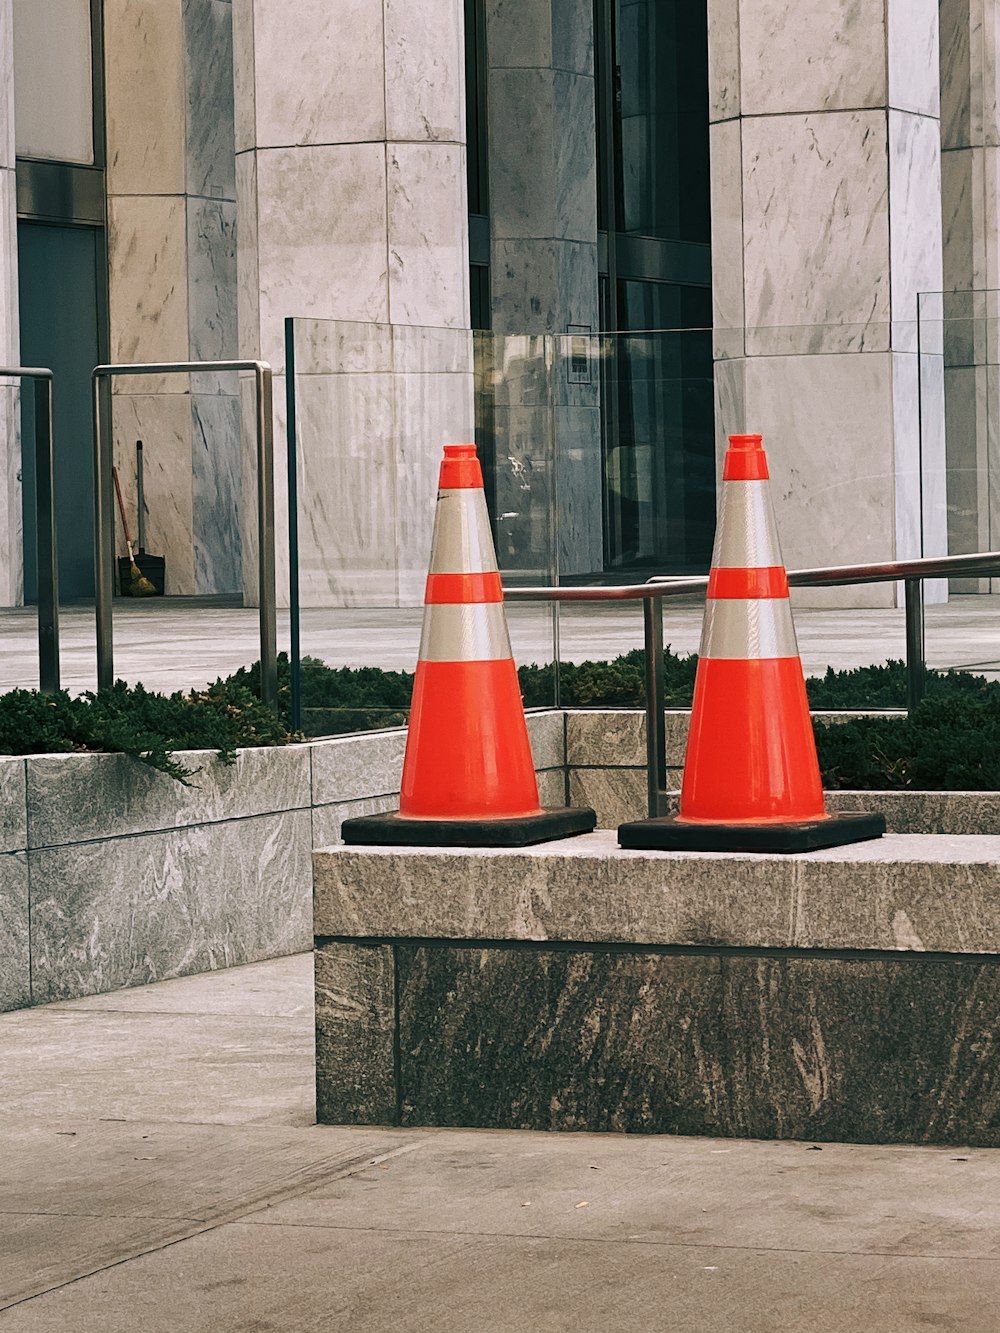 two red-and-white traffic cones